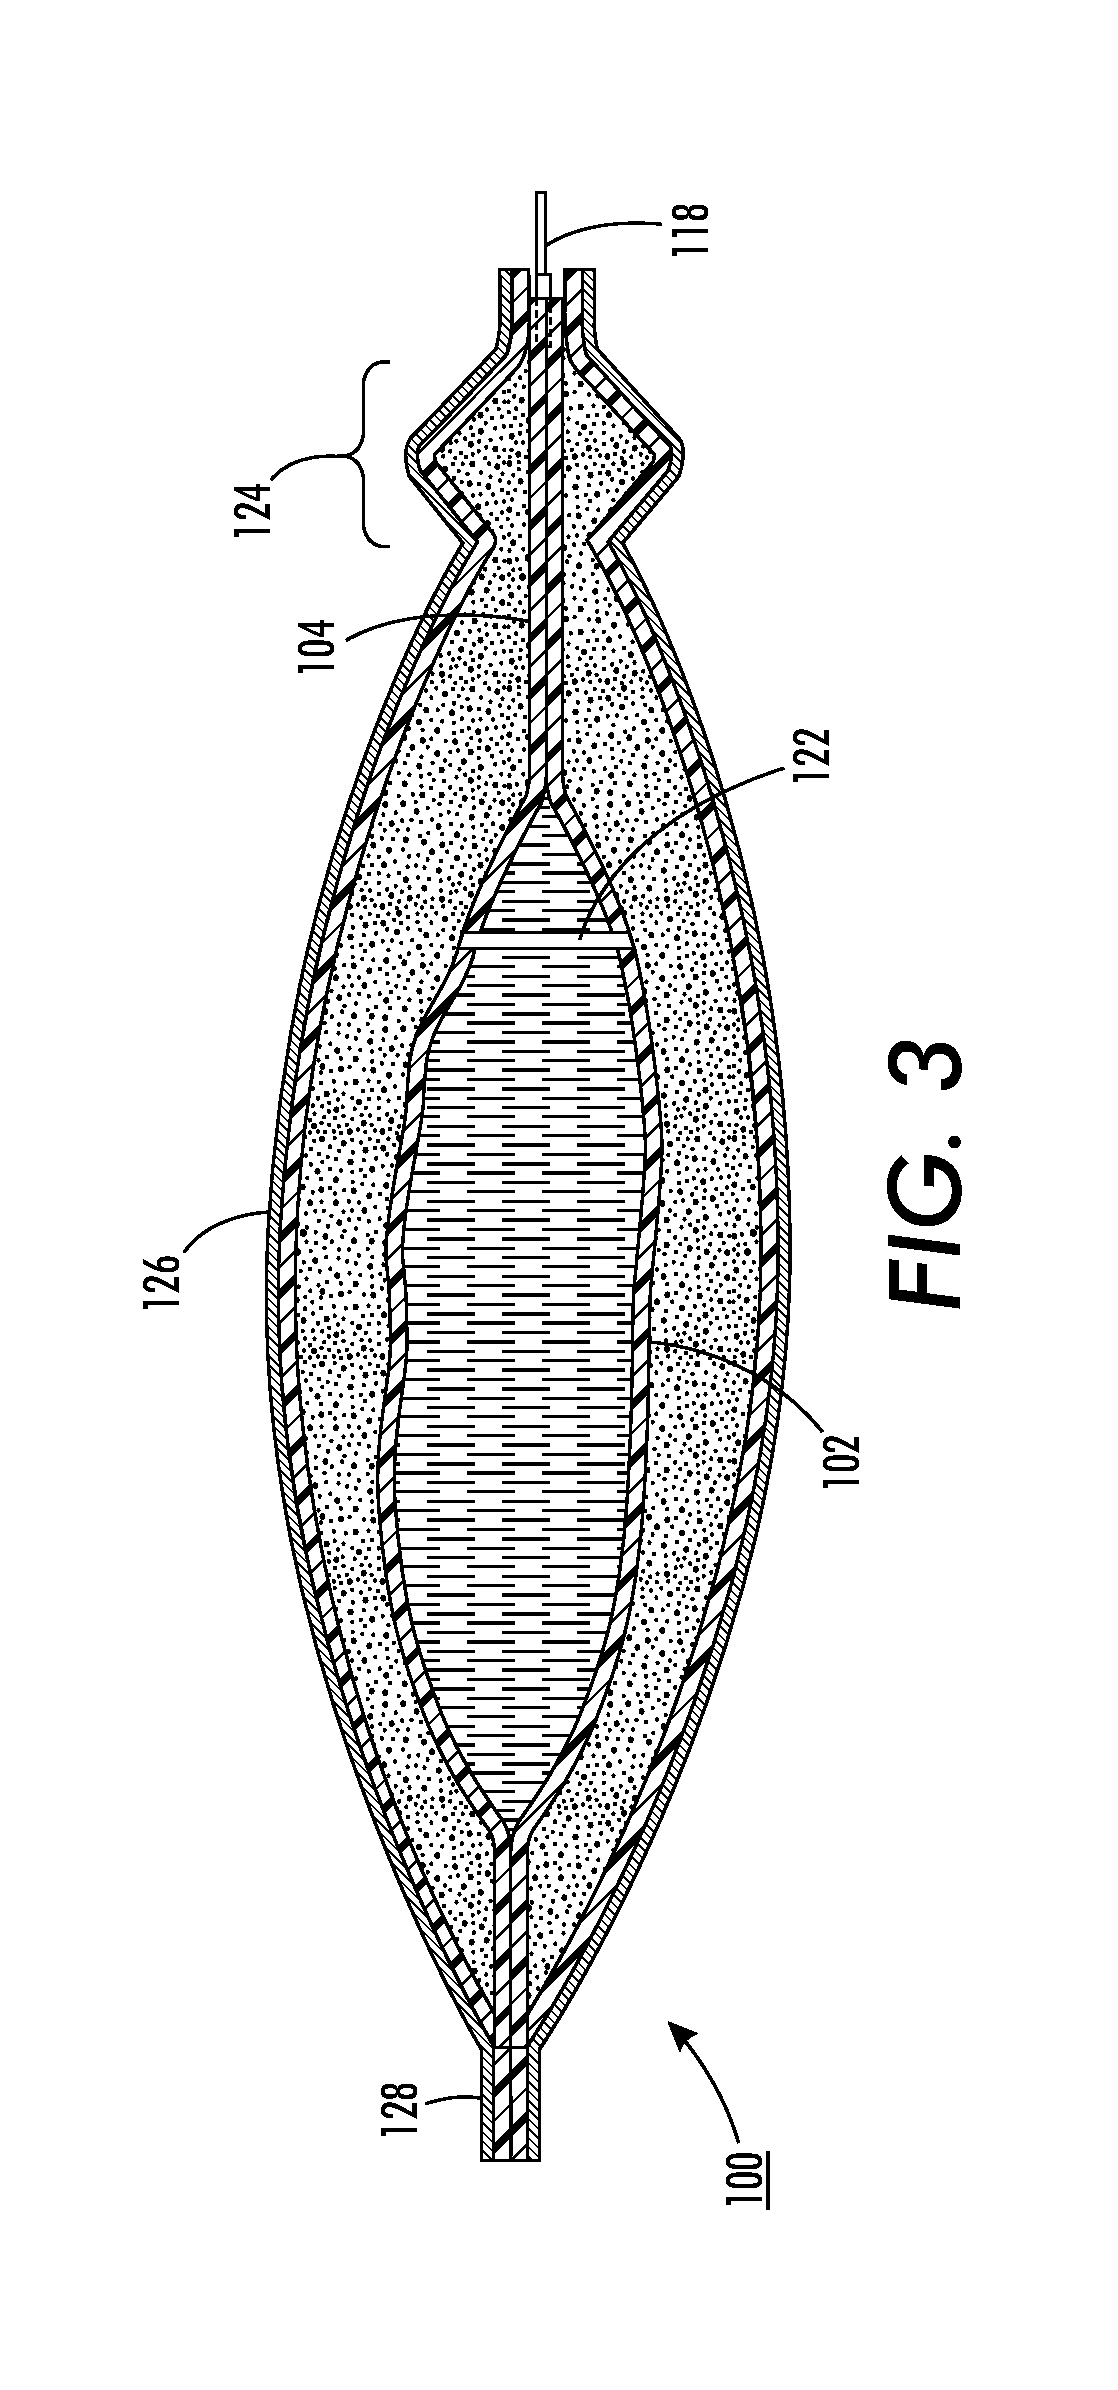 Container having a tearable packet therein